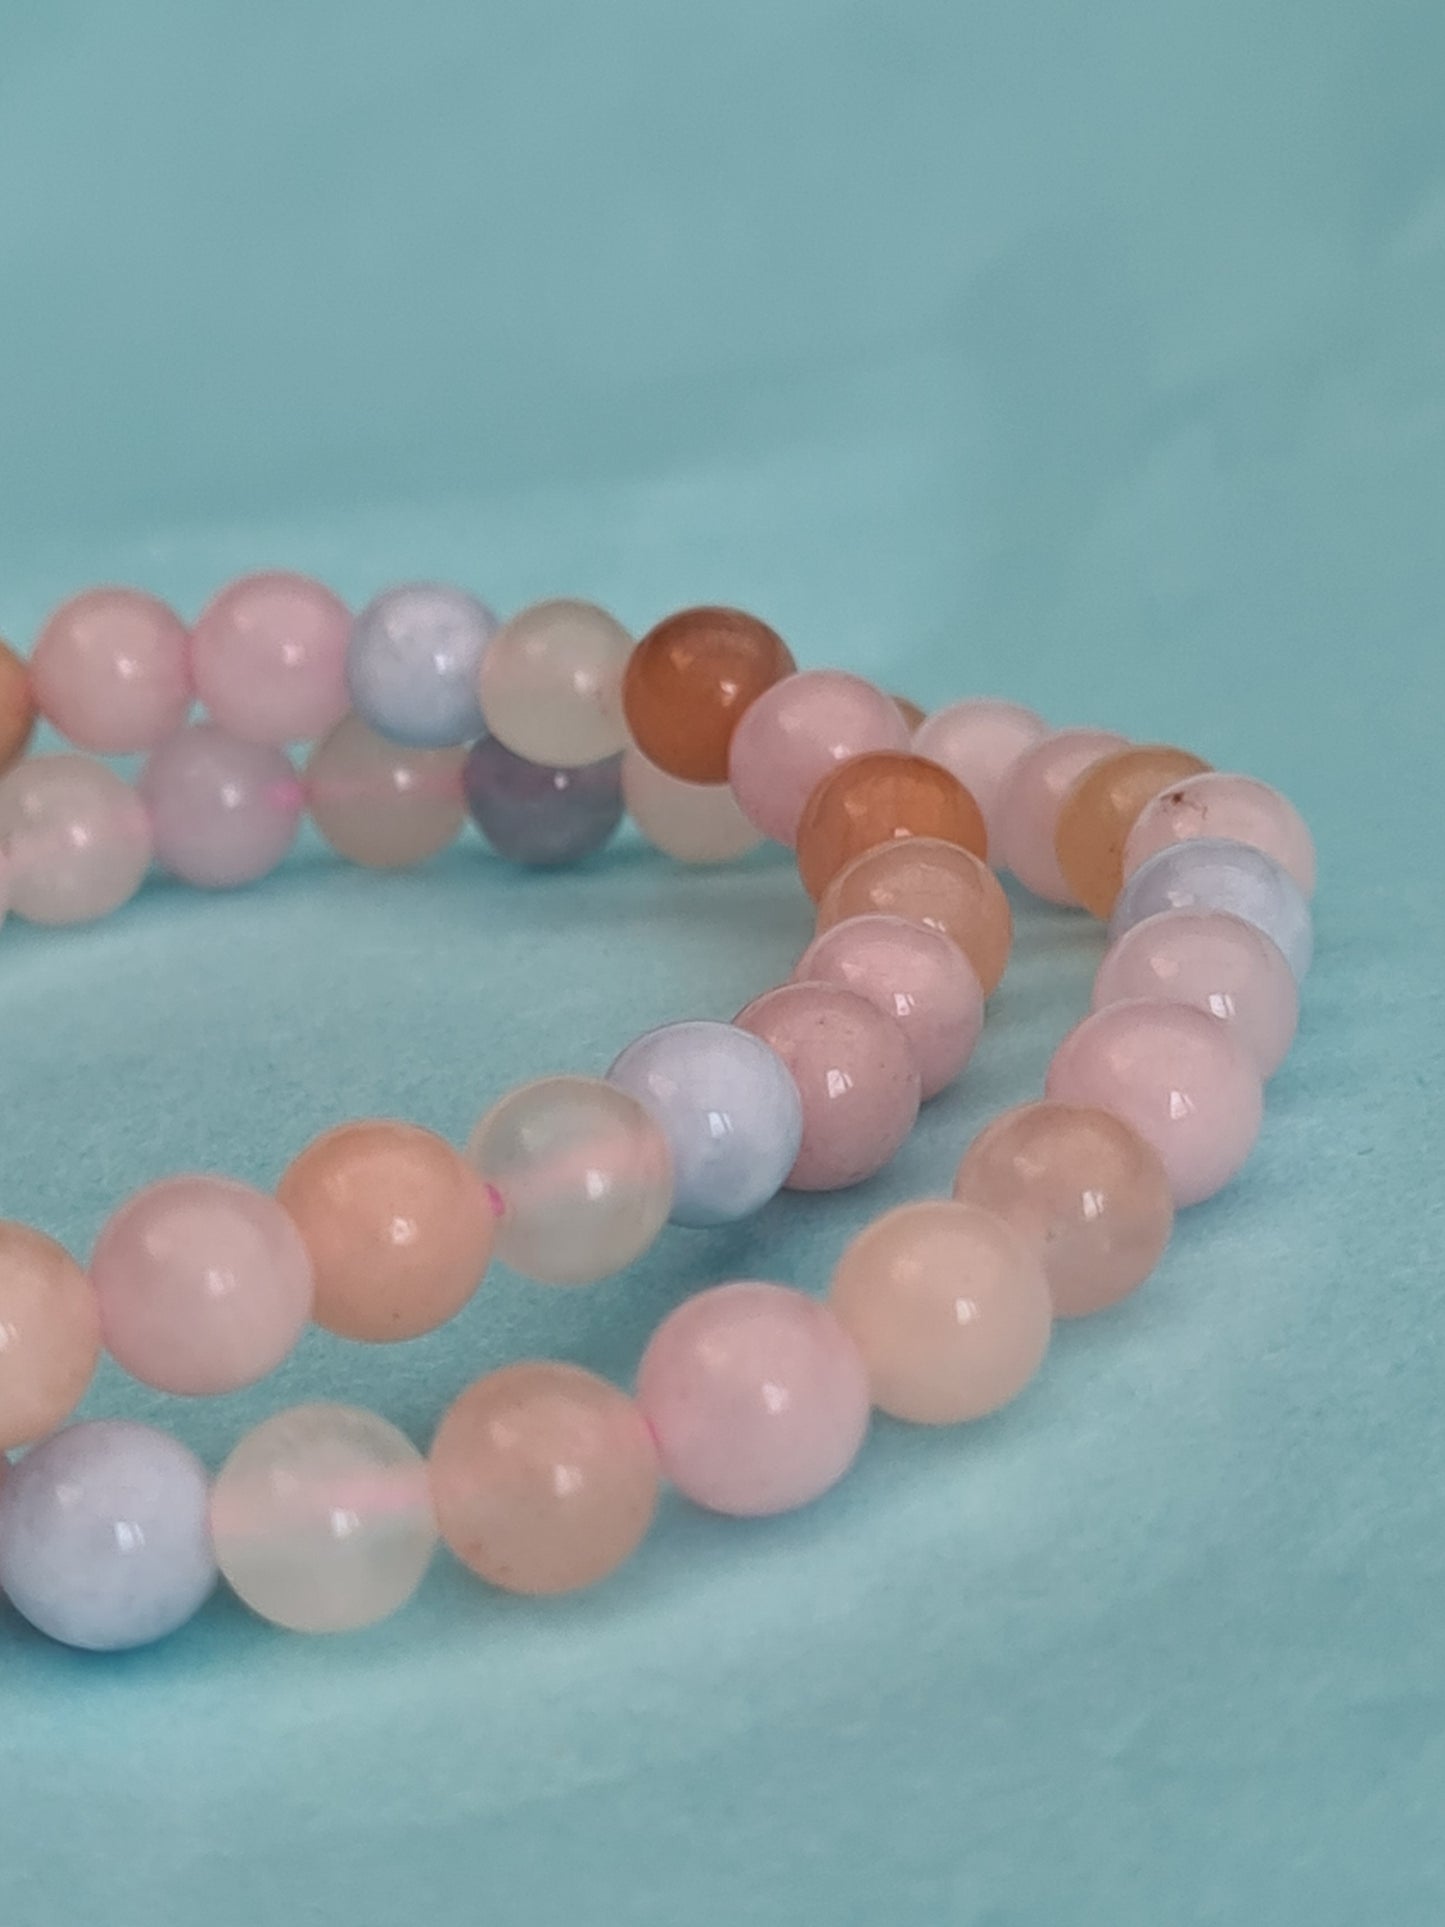 Two 6mm Beaded Morganite Bracelets made up of peach and pink Morganite and Blue Aquamarine Beryl